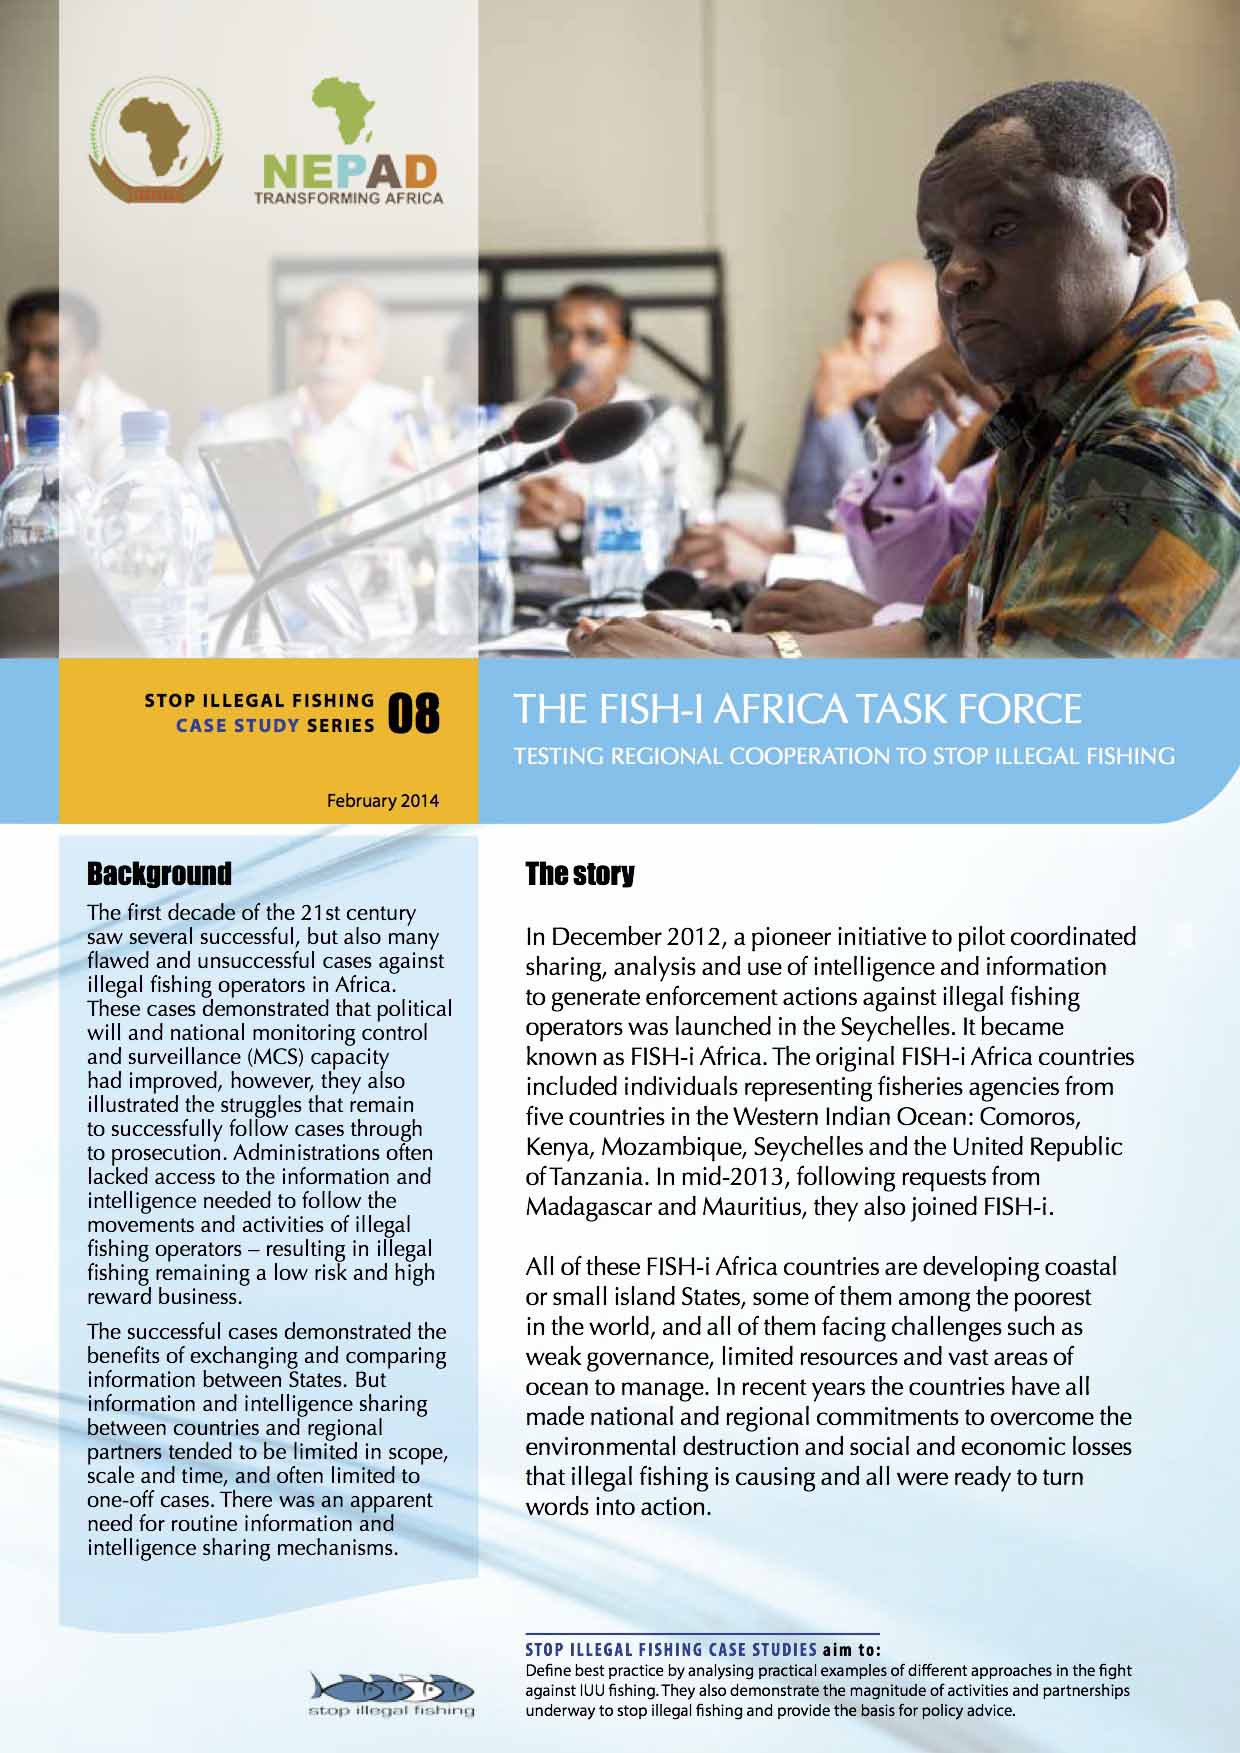 The FISH-i Africa Task Force Case Study